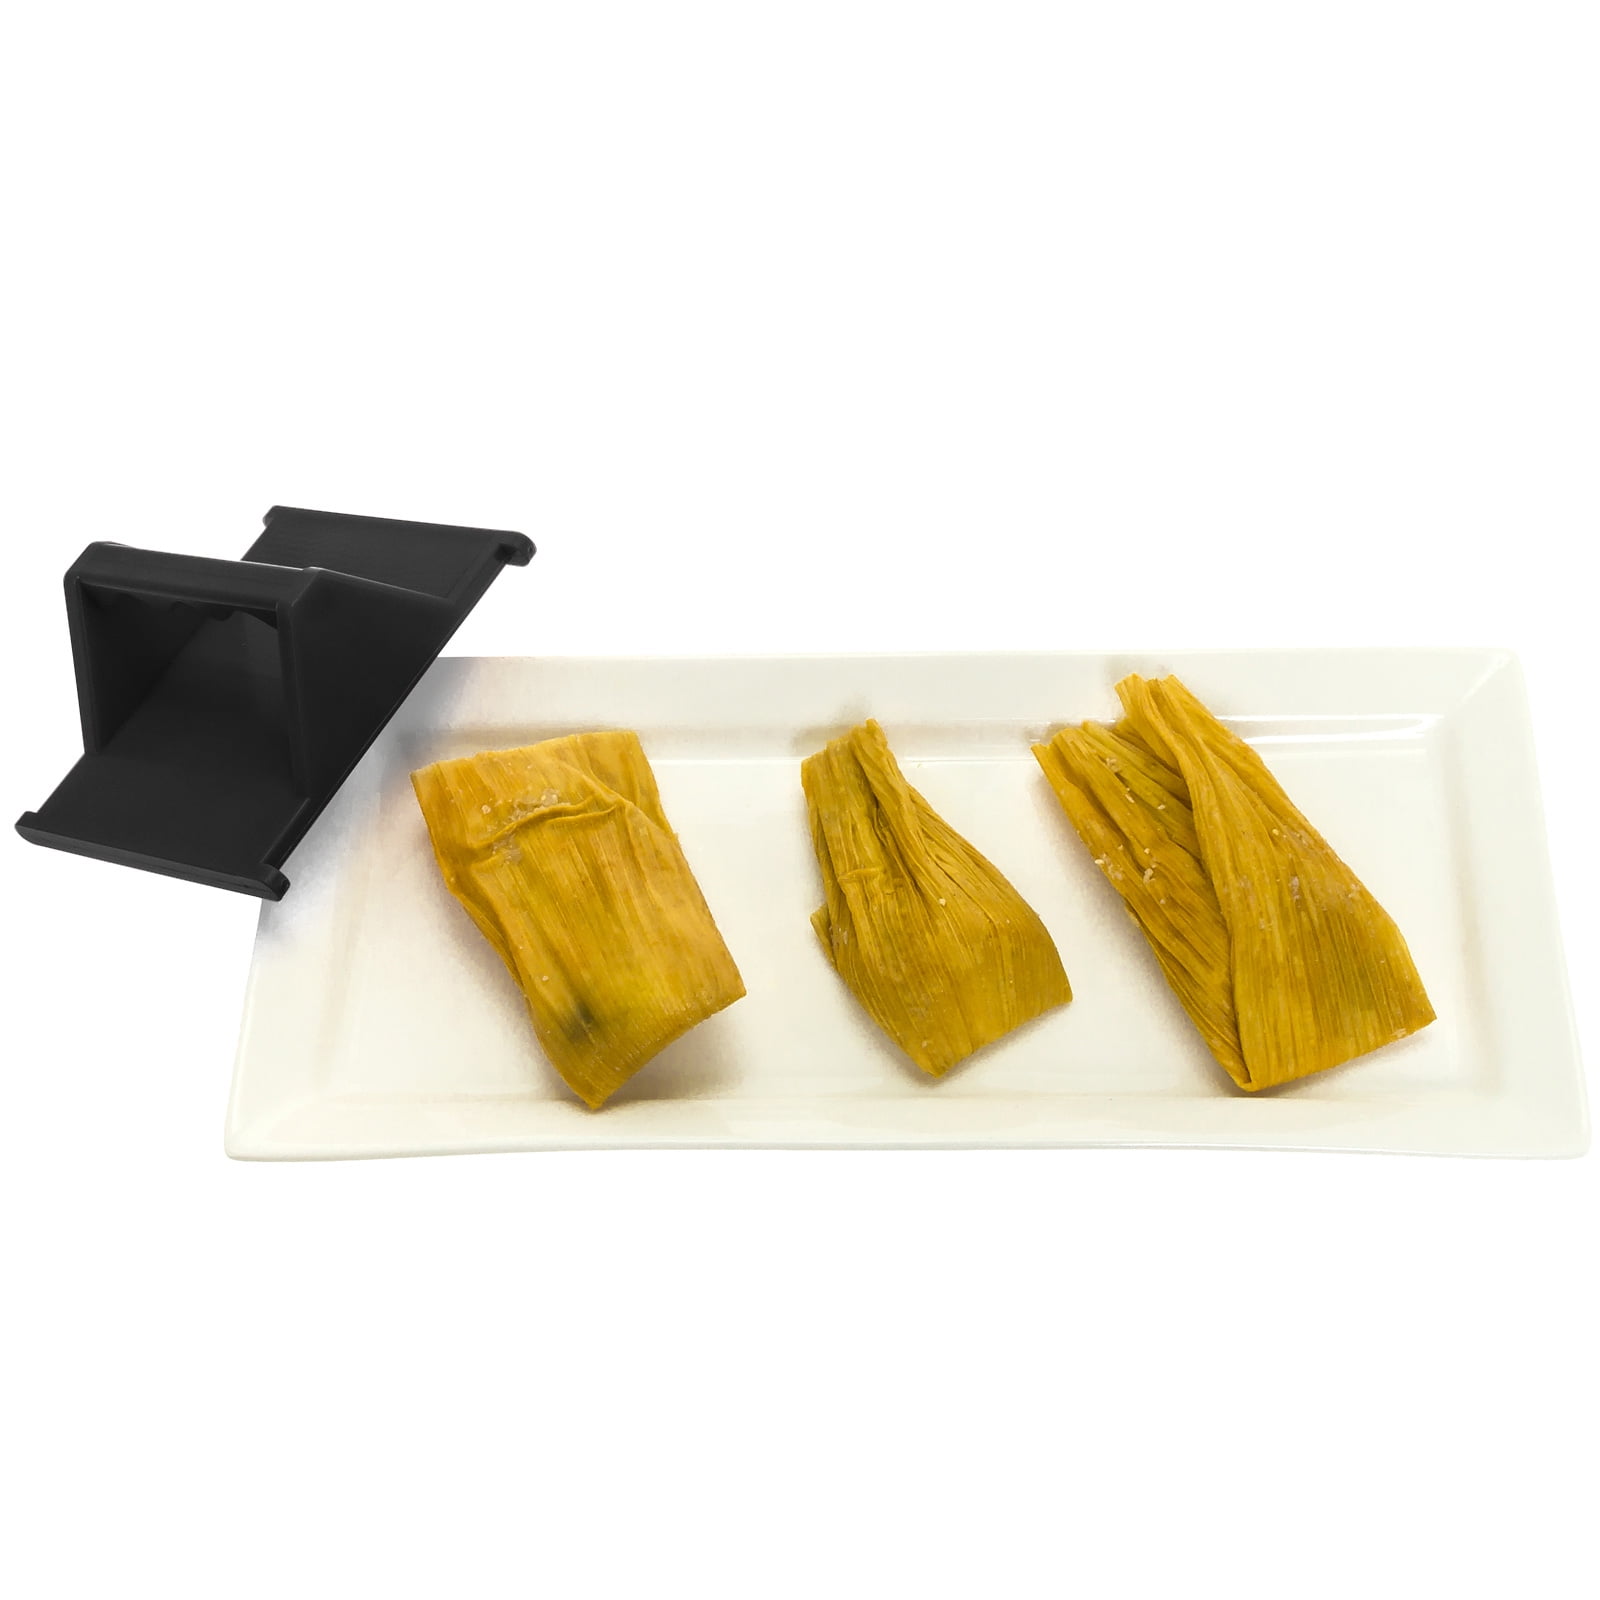 Tamales Masa Spreader, 2 Pcs Pack, Improved Grip Design, Masa Spreader  For Tamales, Easy to Use Tool For Making Tamales, Tamale Spreader Tool, New, Improved Easy Grip Horizontal Design